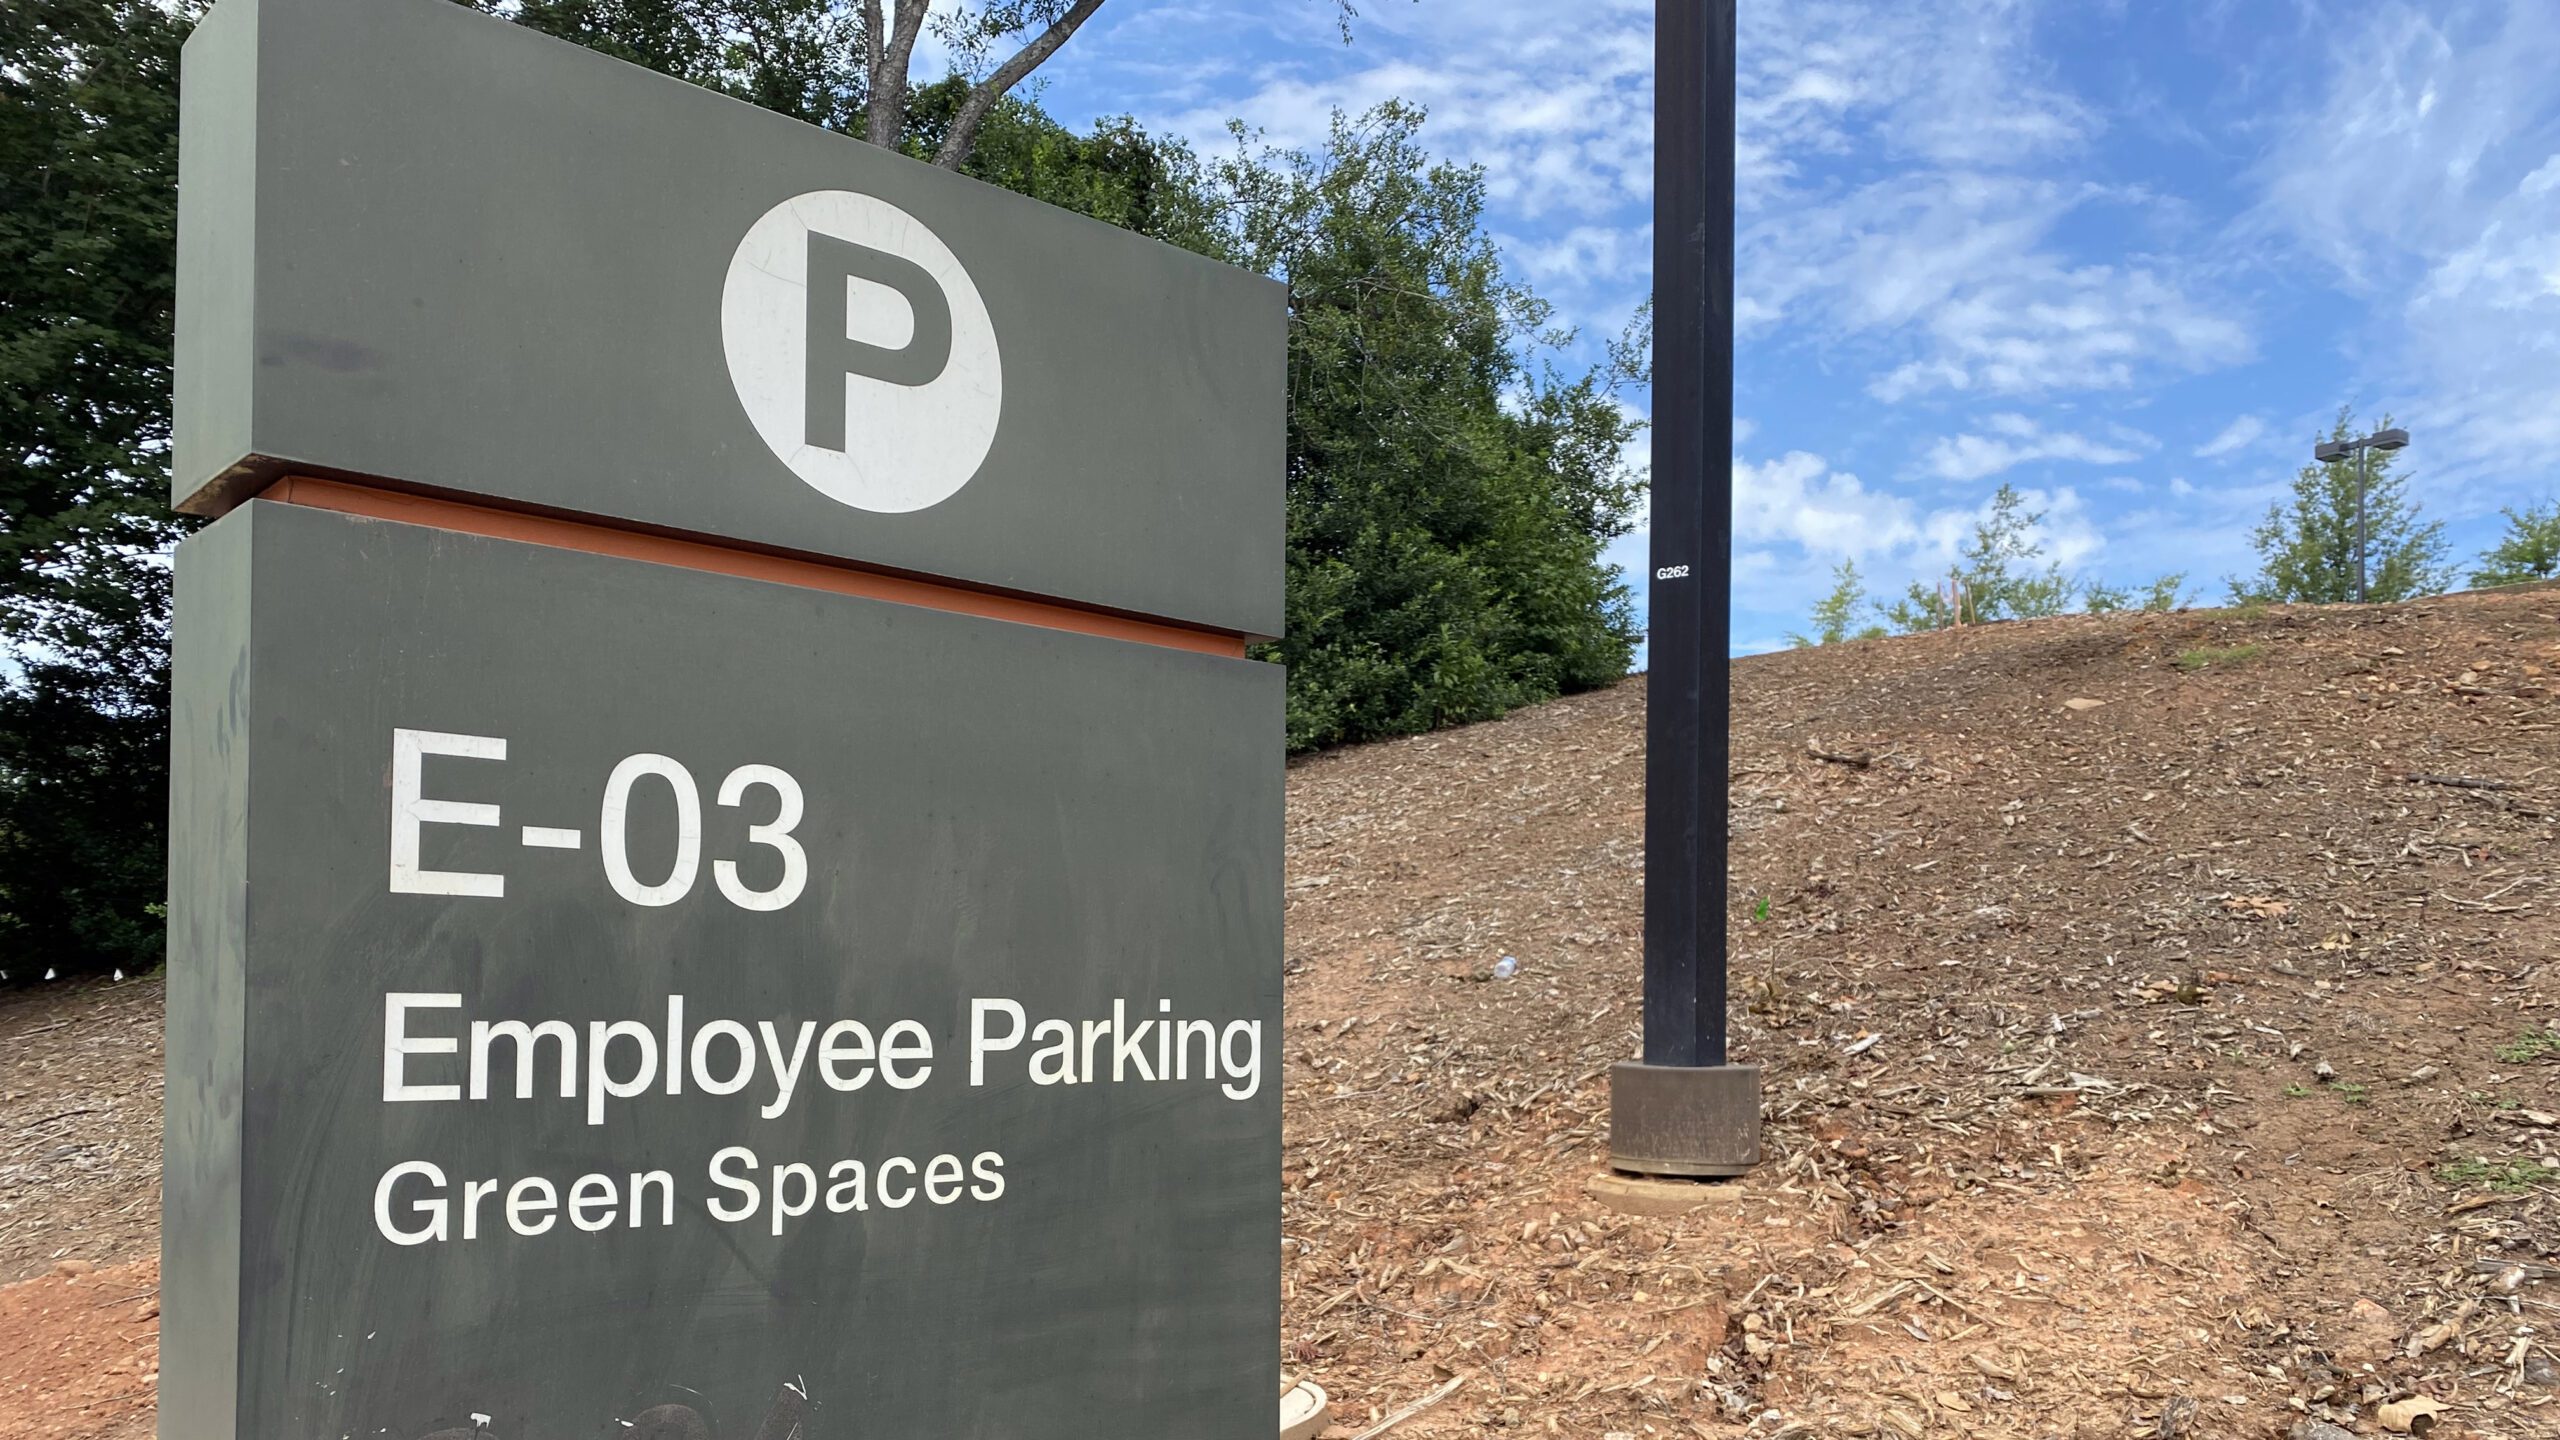 A parking sign reading "E-03 Employee Parking Green Spaces"